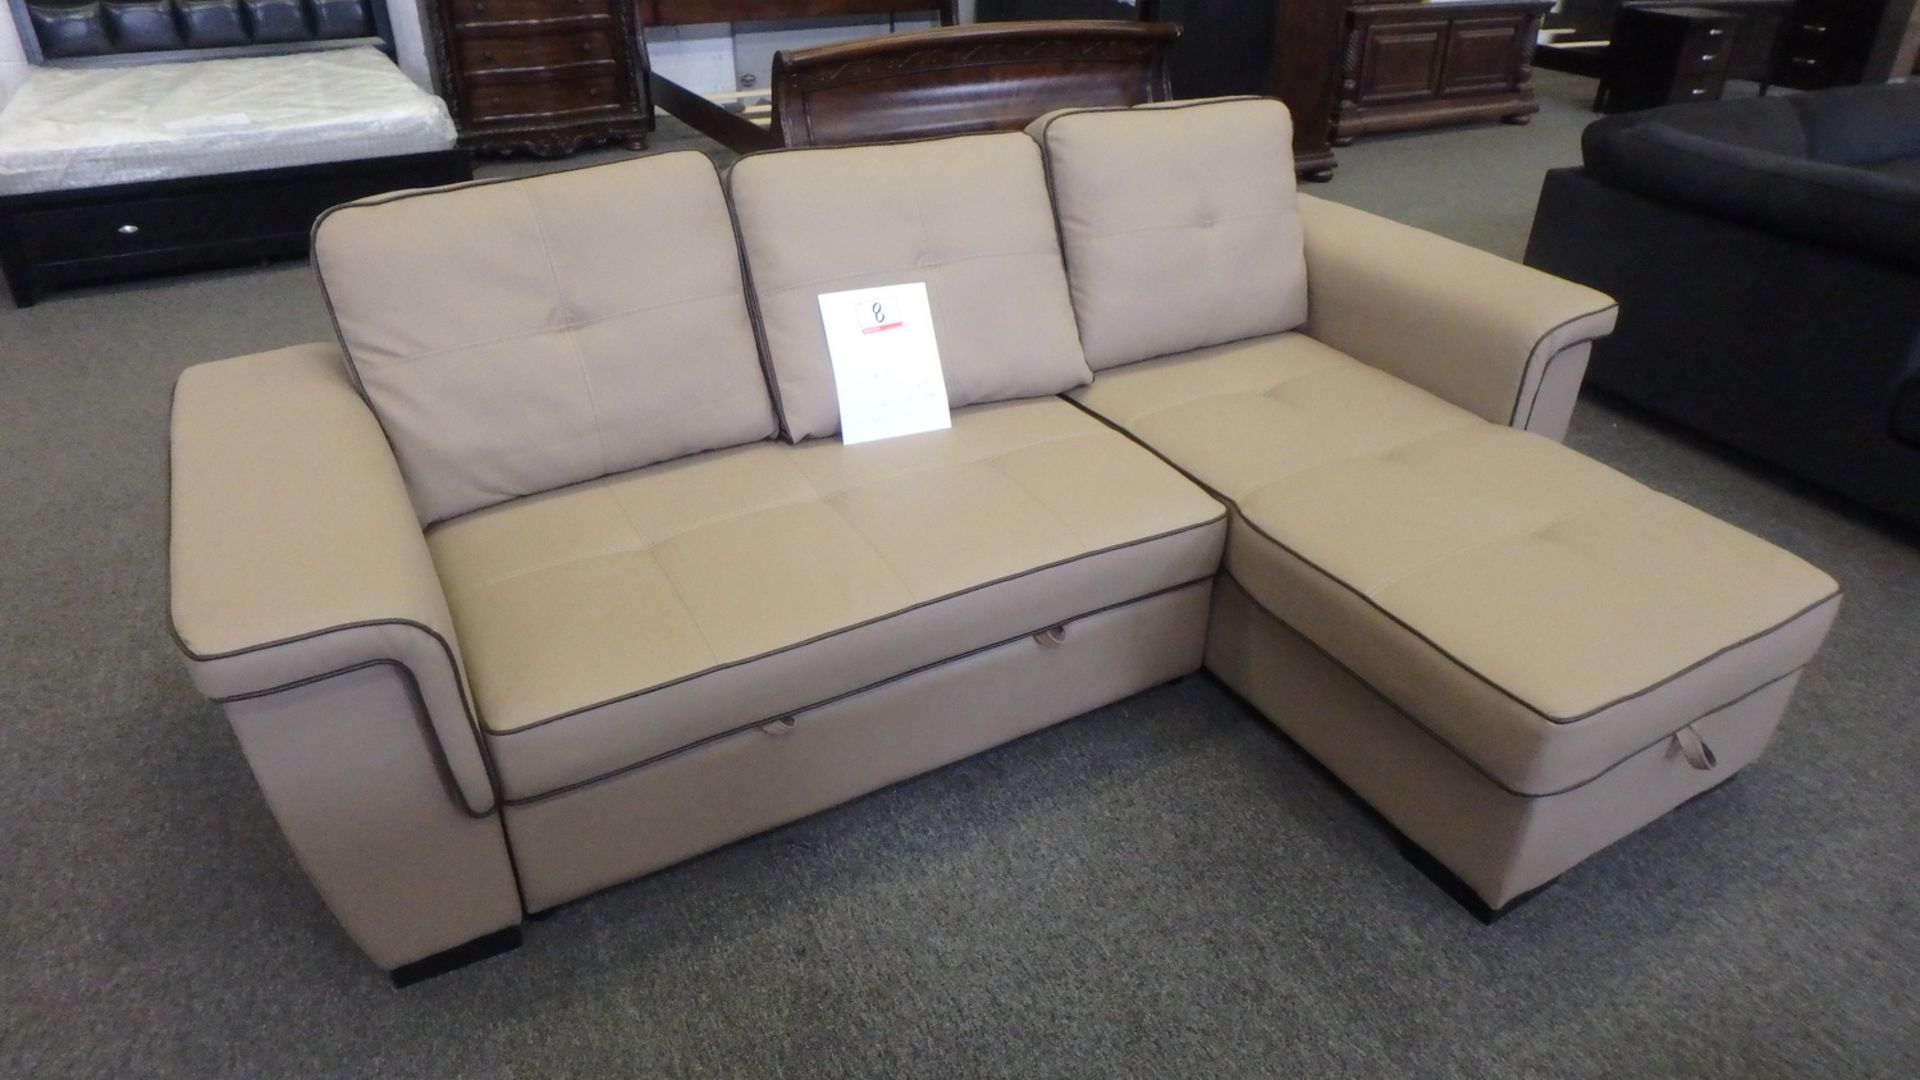 UNITS - LATTE BROWN PU LEATHER SOFA / CONVERTIBLE BED C/W STORAGE CHAISE (LK-BEATRICE) (NEW)